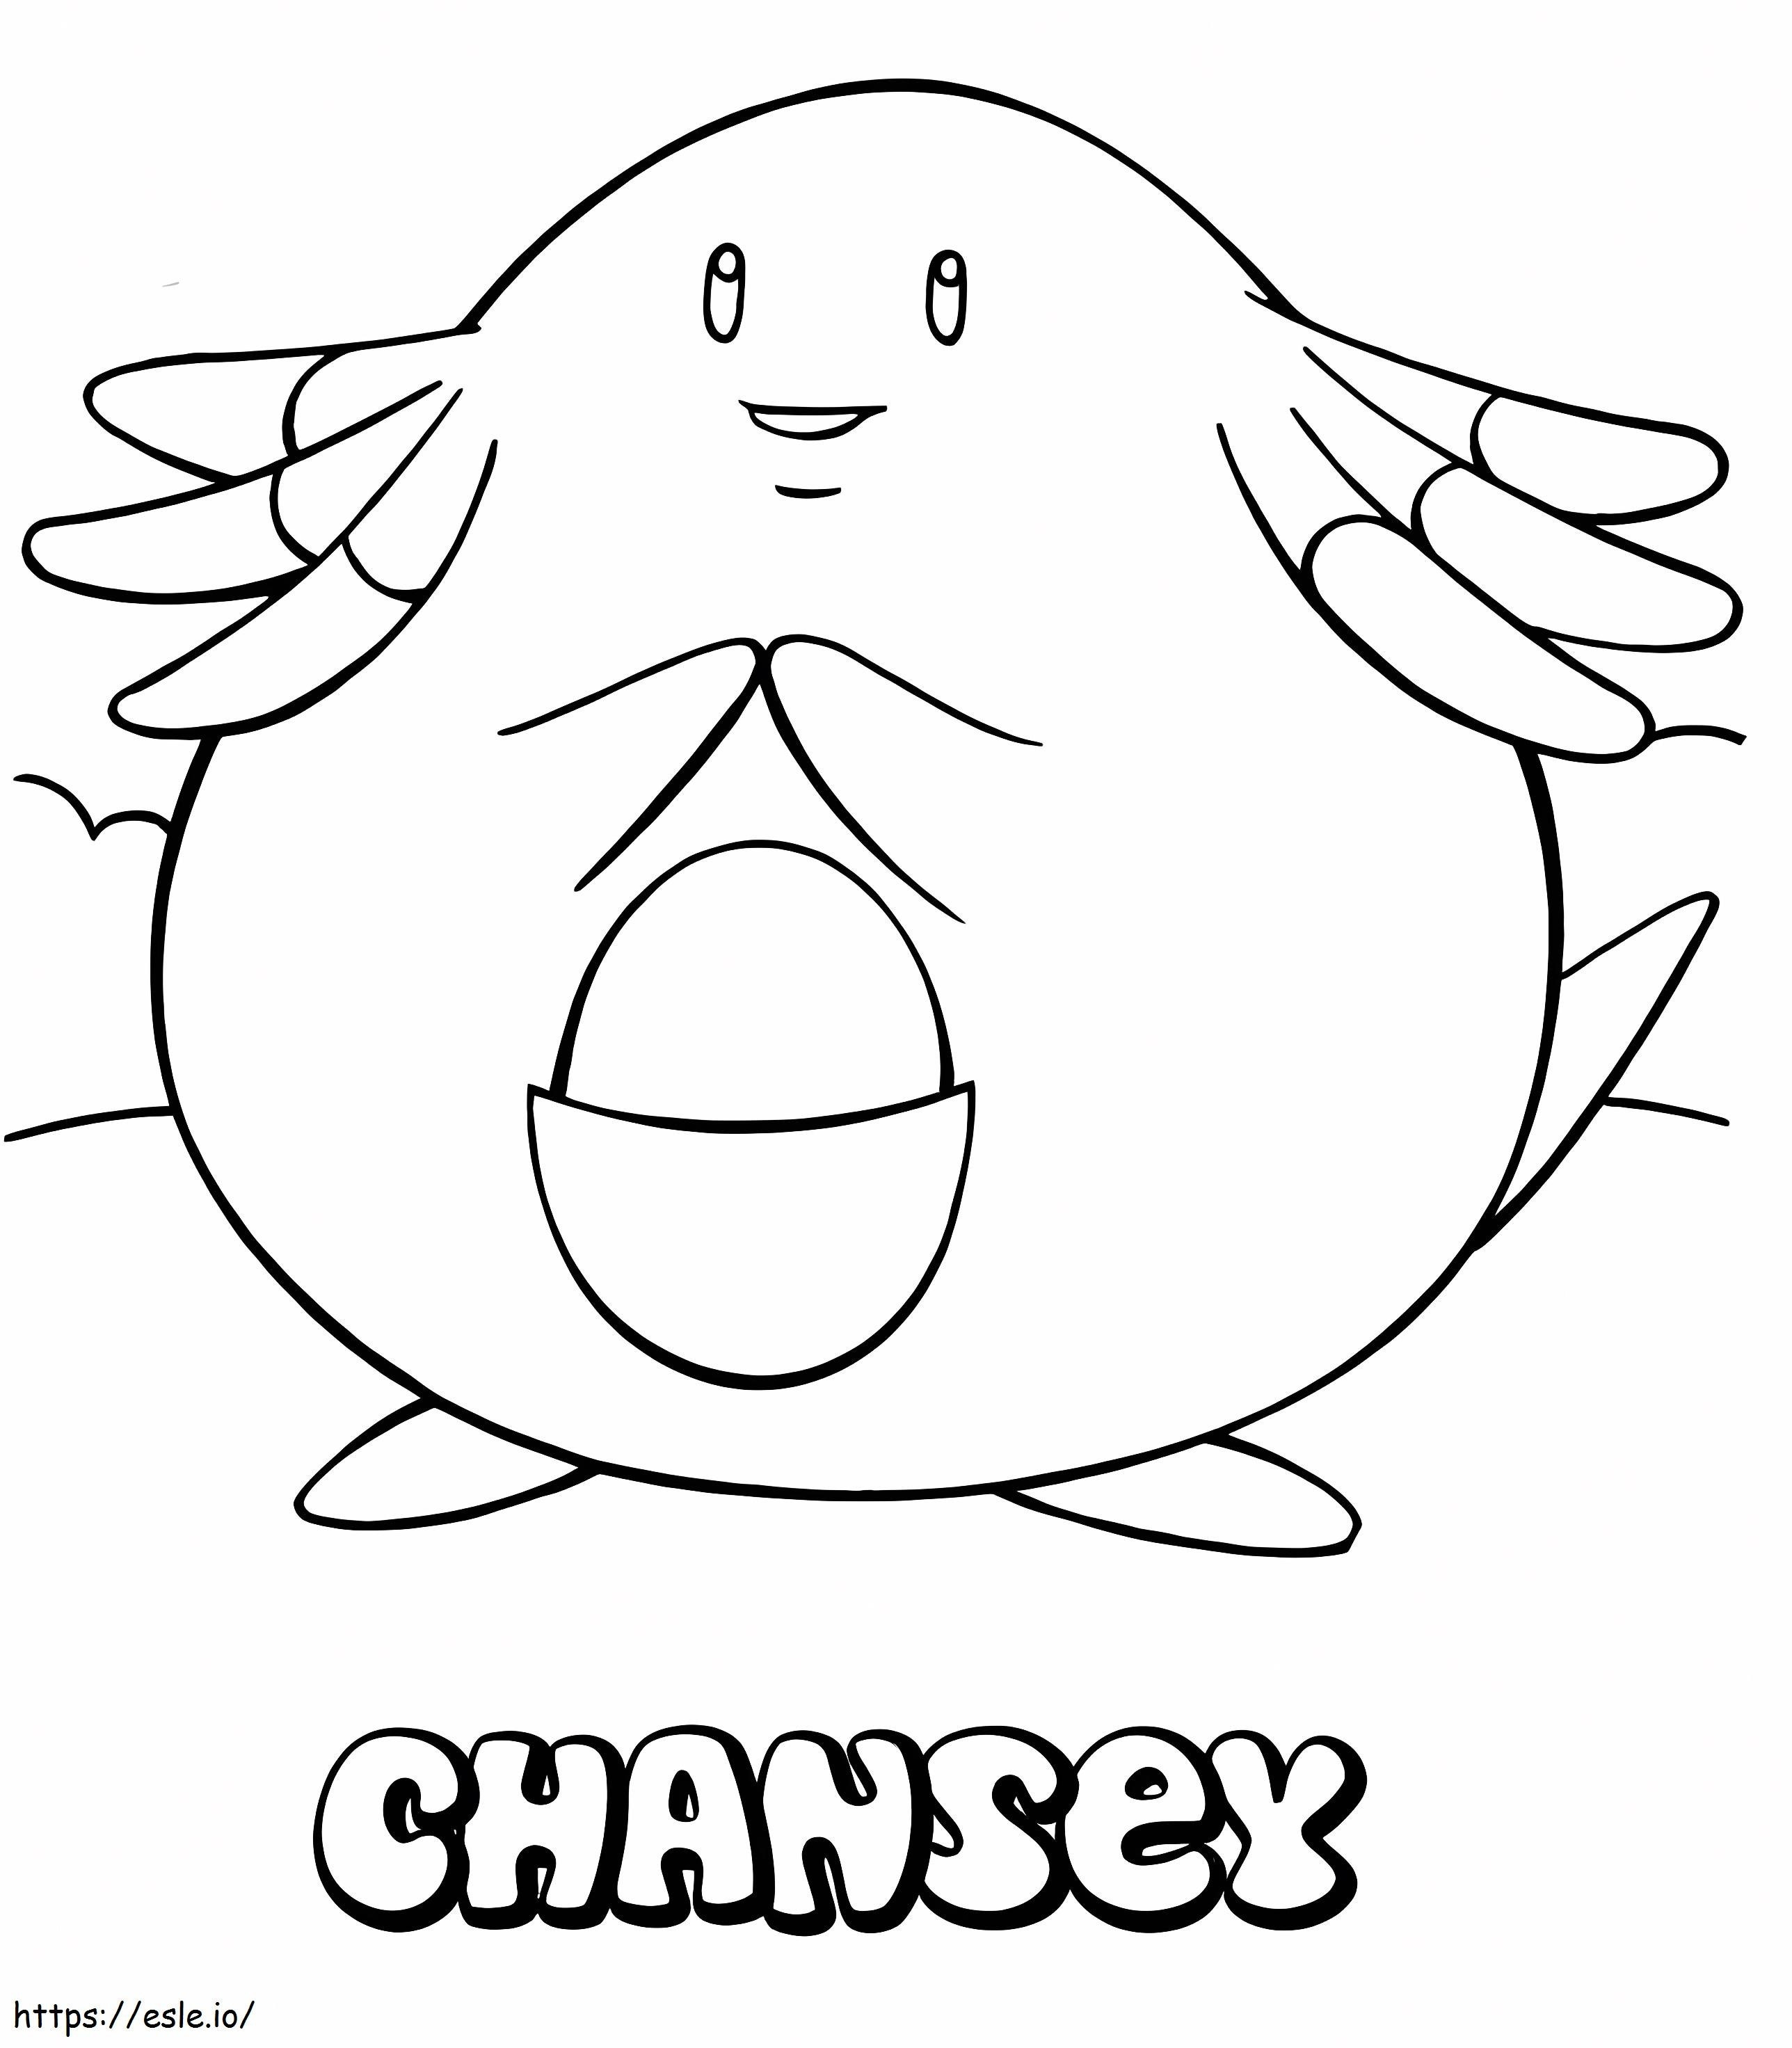 Pokemon Chansey coloring page